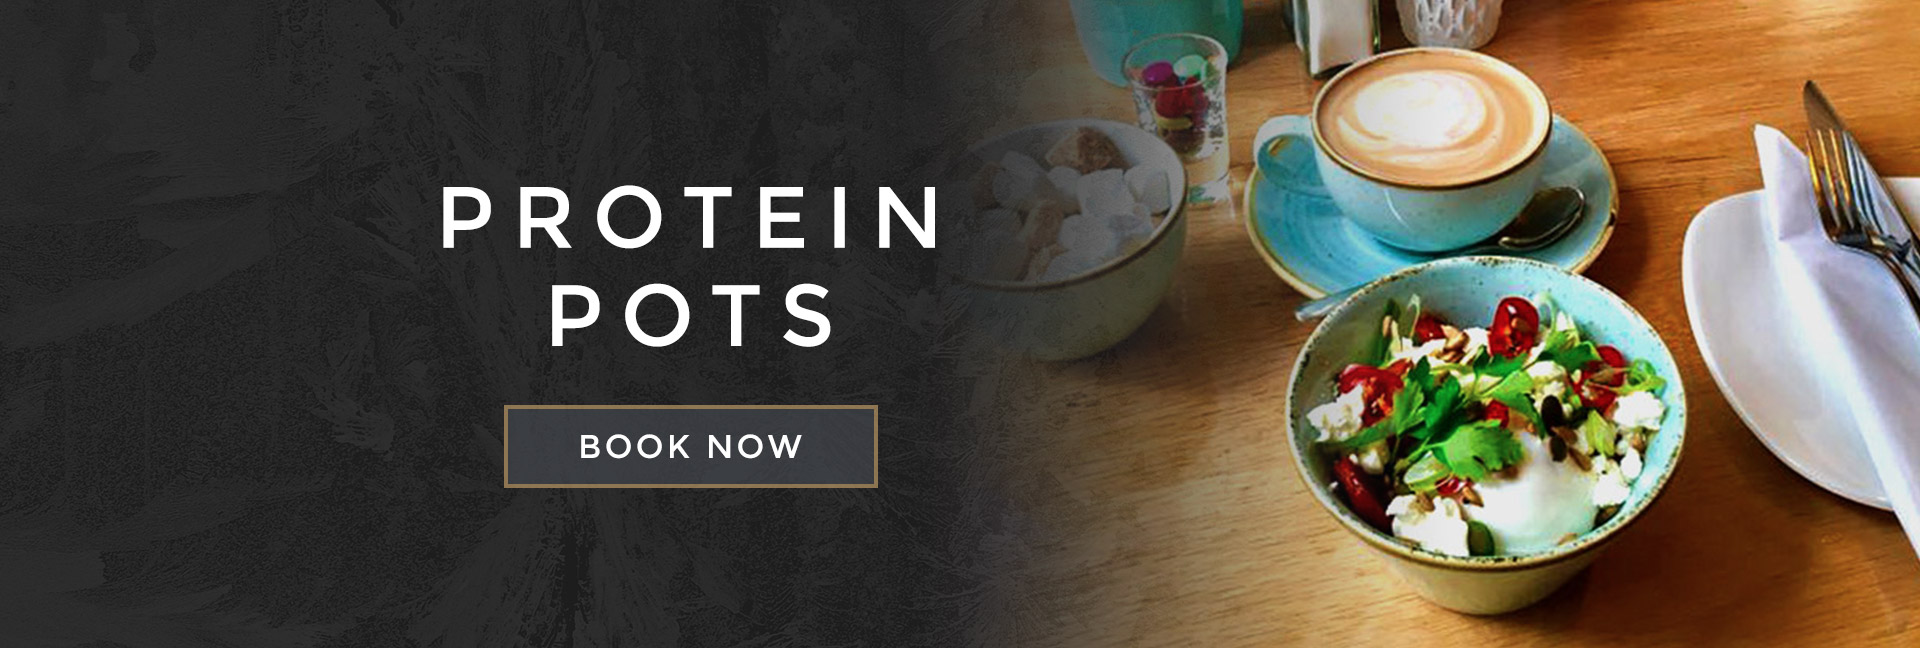 Protein pots at All Bar One George St Edinburgh - Book your table